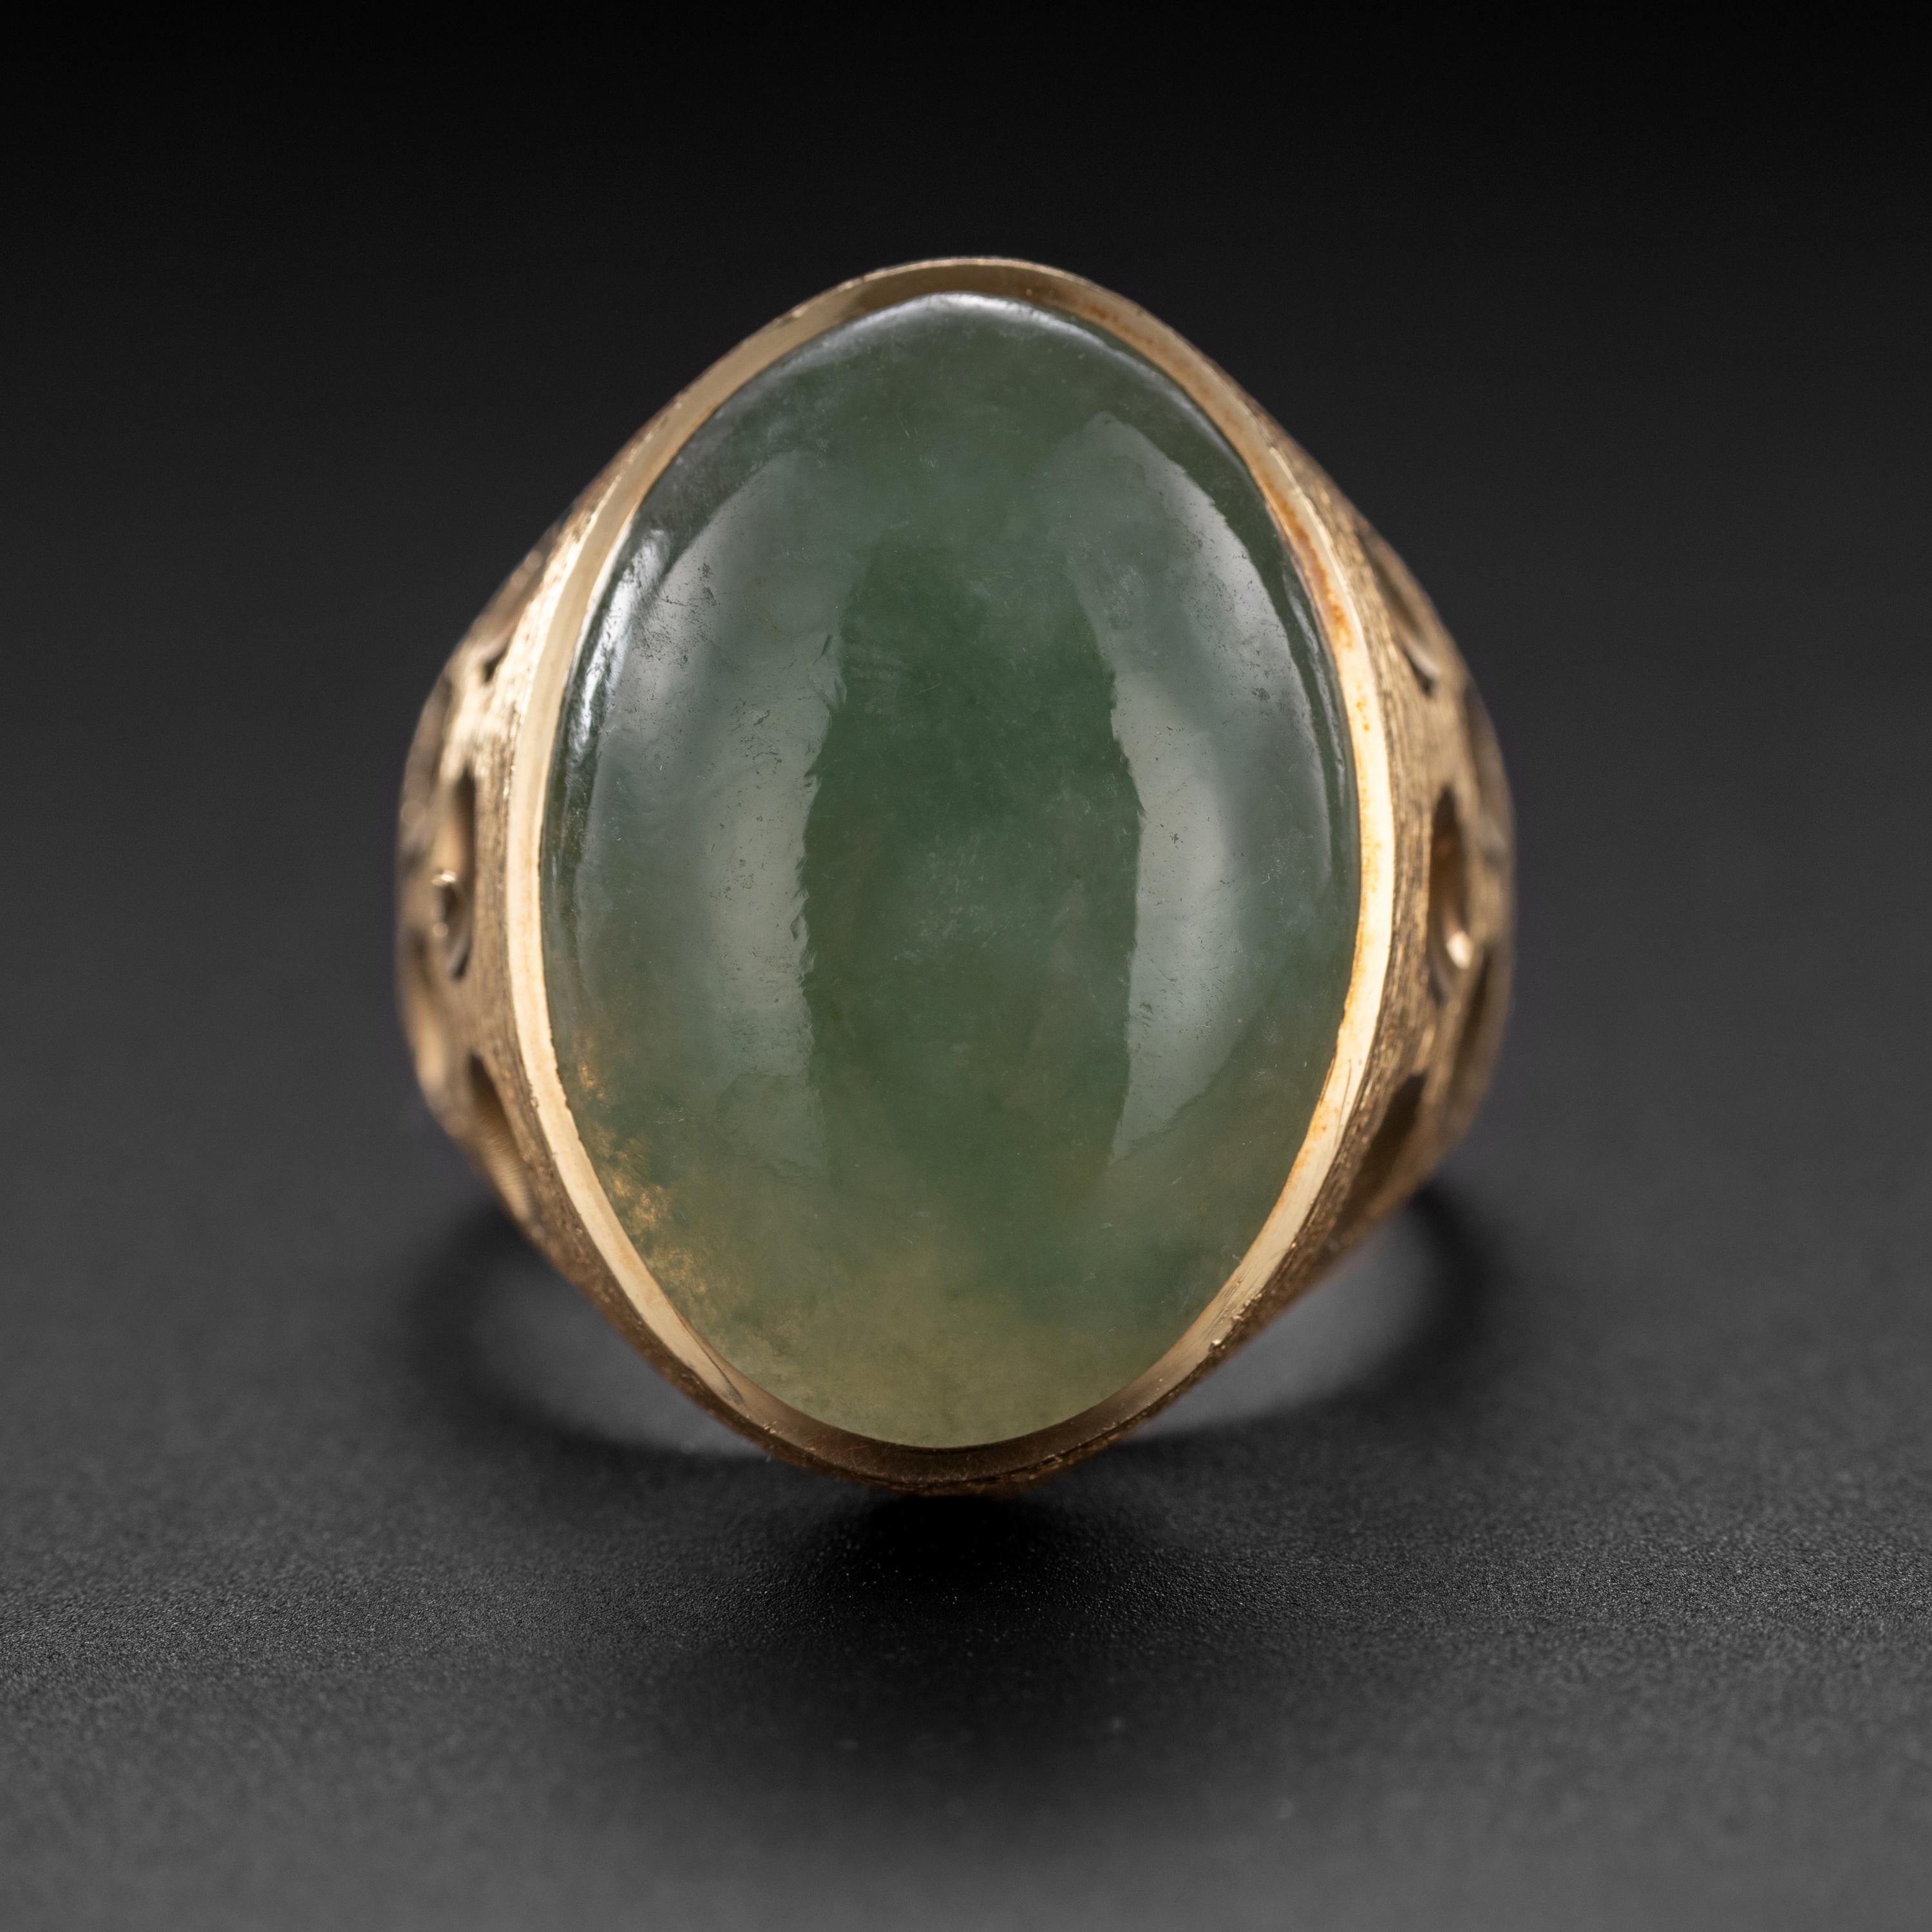 This is one substantial -and substantially cool- jadeite jade ring from the middle of the last century (circa 1960s). Mod and modern, natural and untreated Burmese jadeite ring is incredibly impressive. It's a ring that looks like it would be